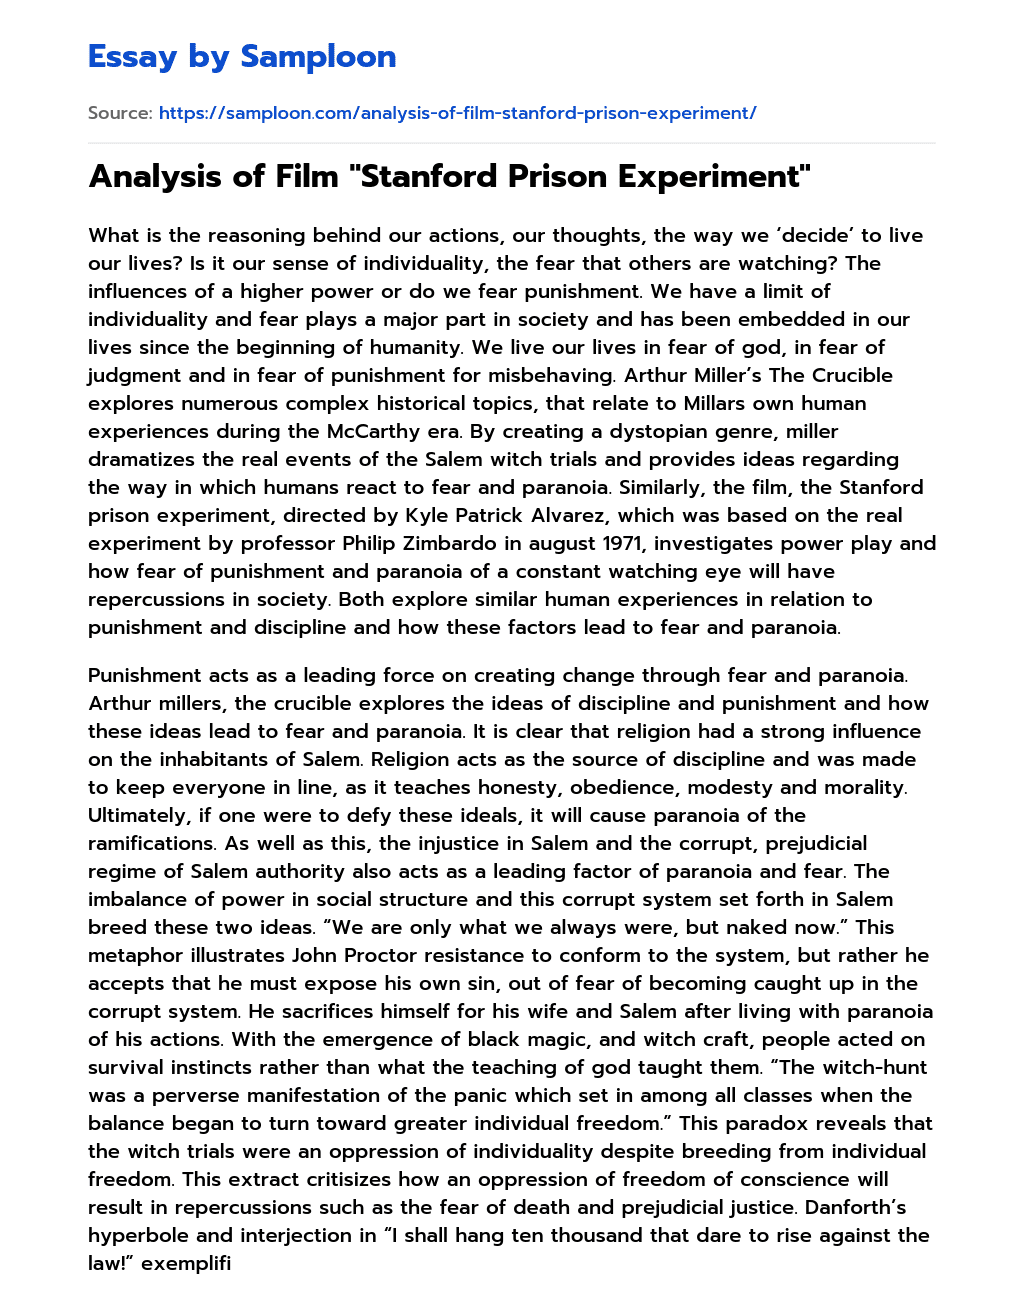 Analysis of Film “Stanford Prison Experiment” essay